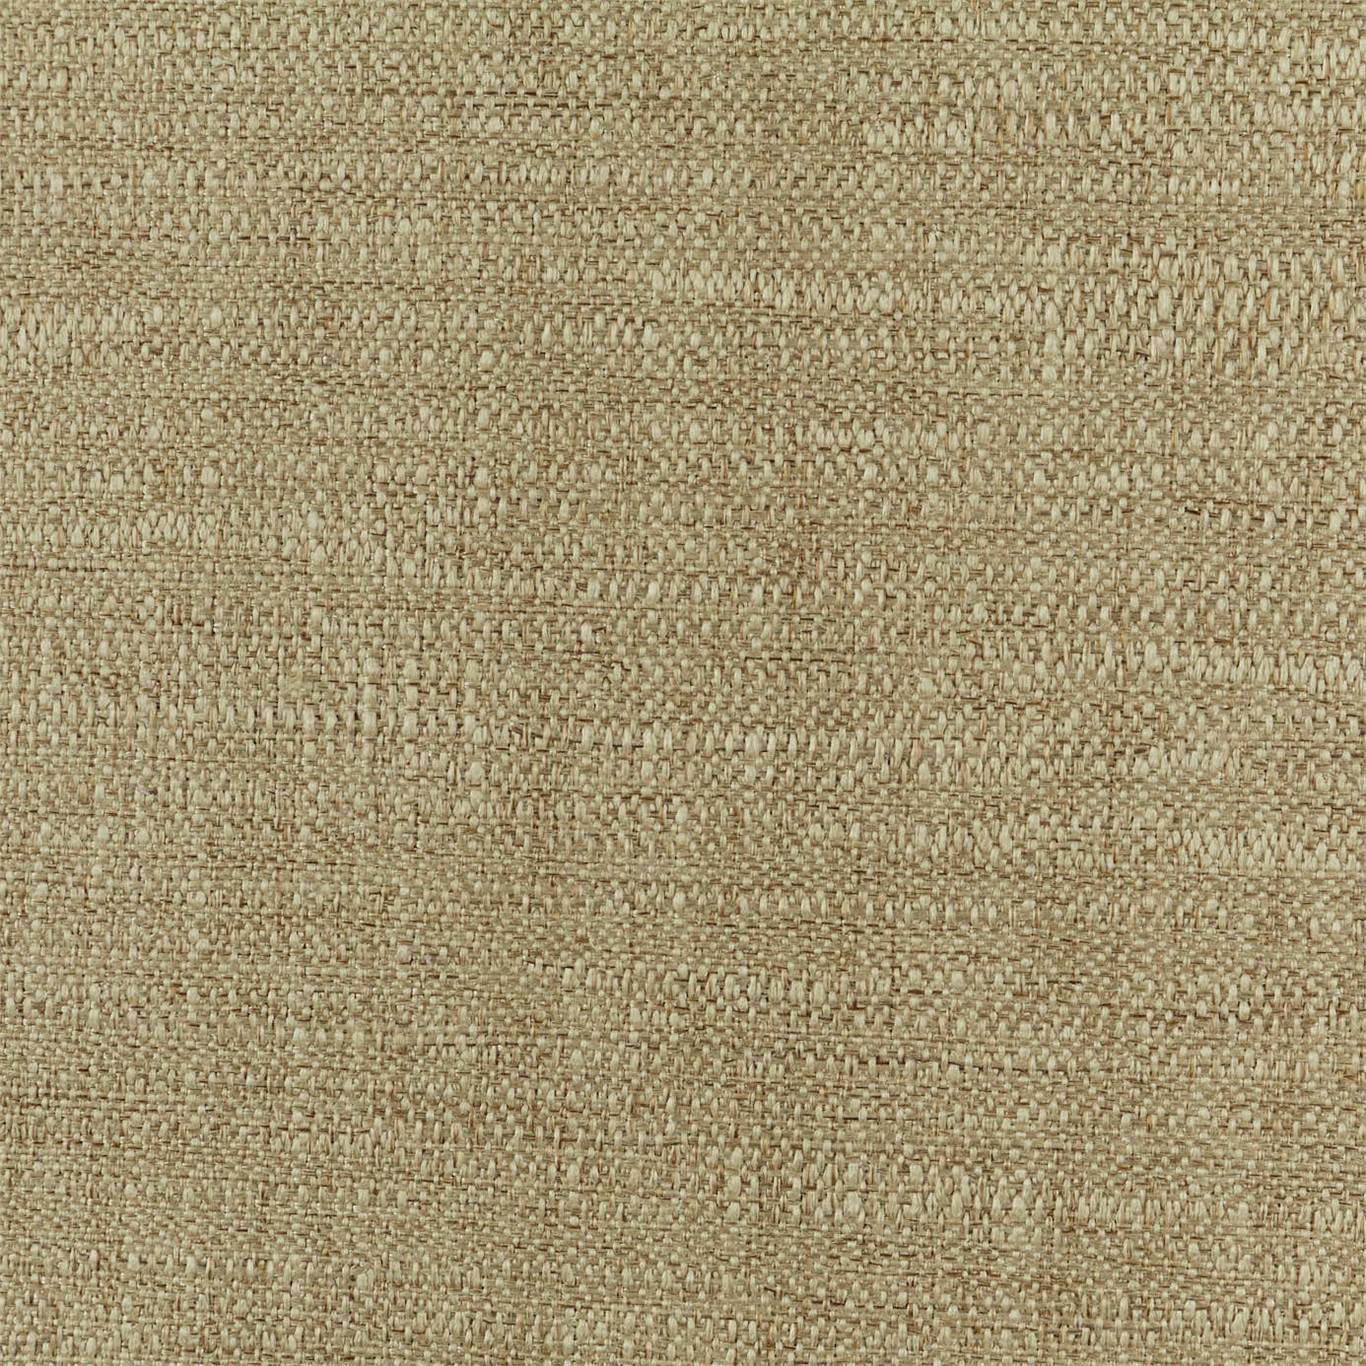 Extensive Fossil Fabric by HAR